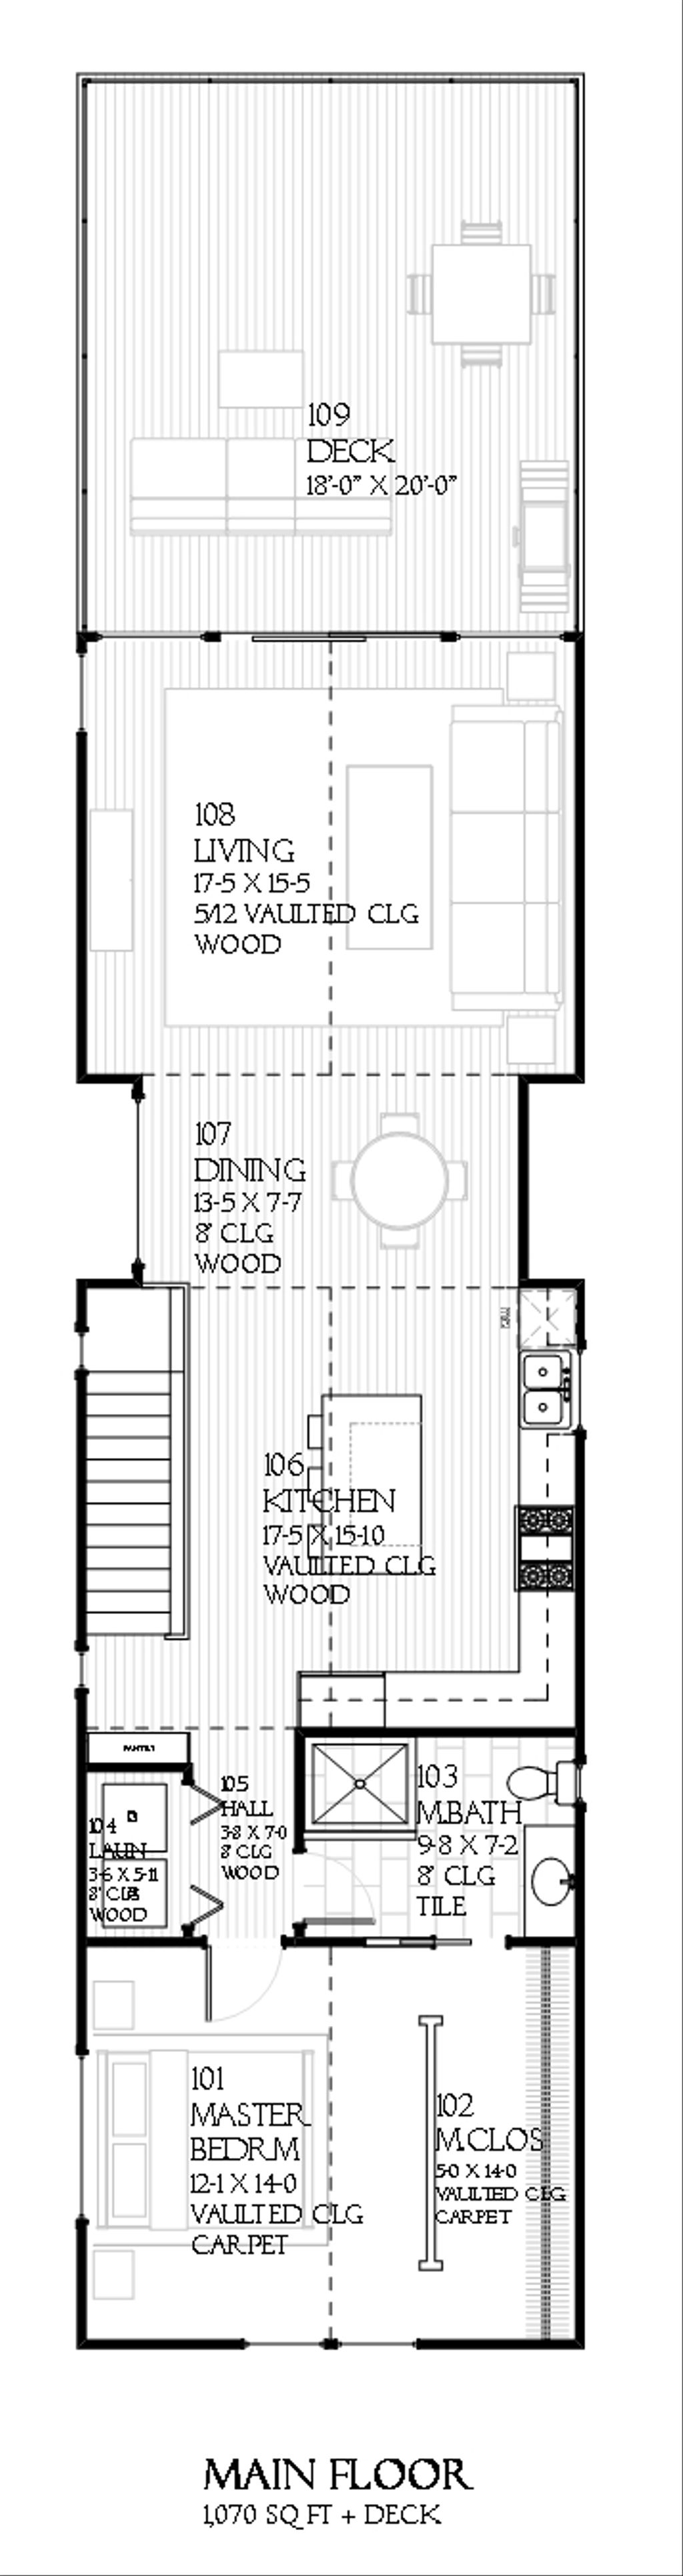 Cottage Style House Plan 3 Beds 2 Baths 2024 Sq/Ft Plan 90125